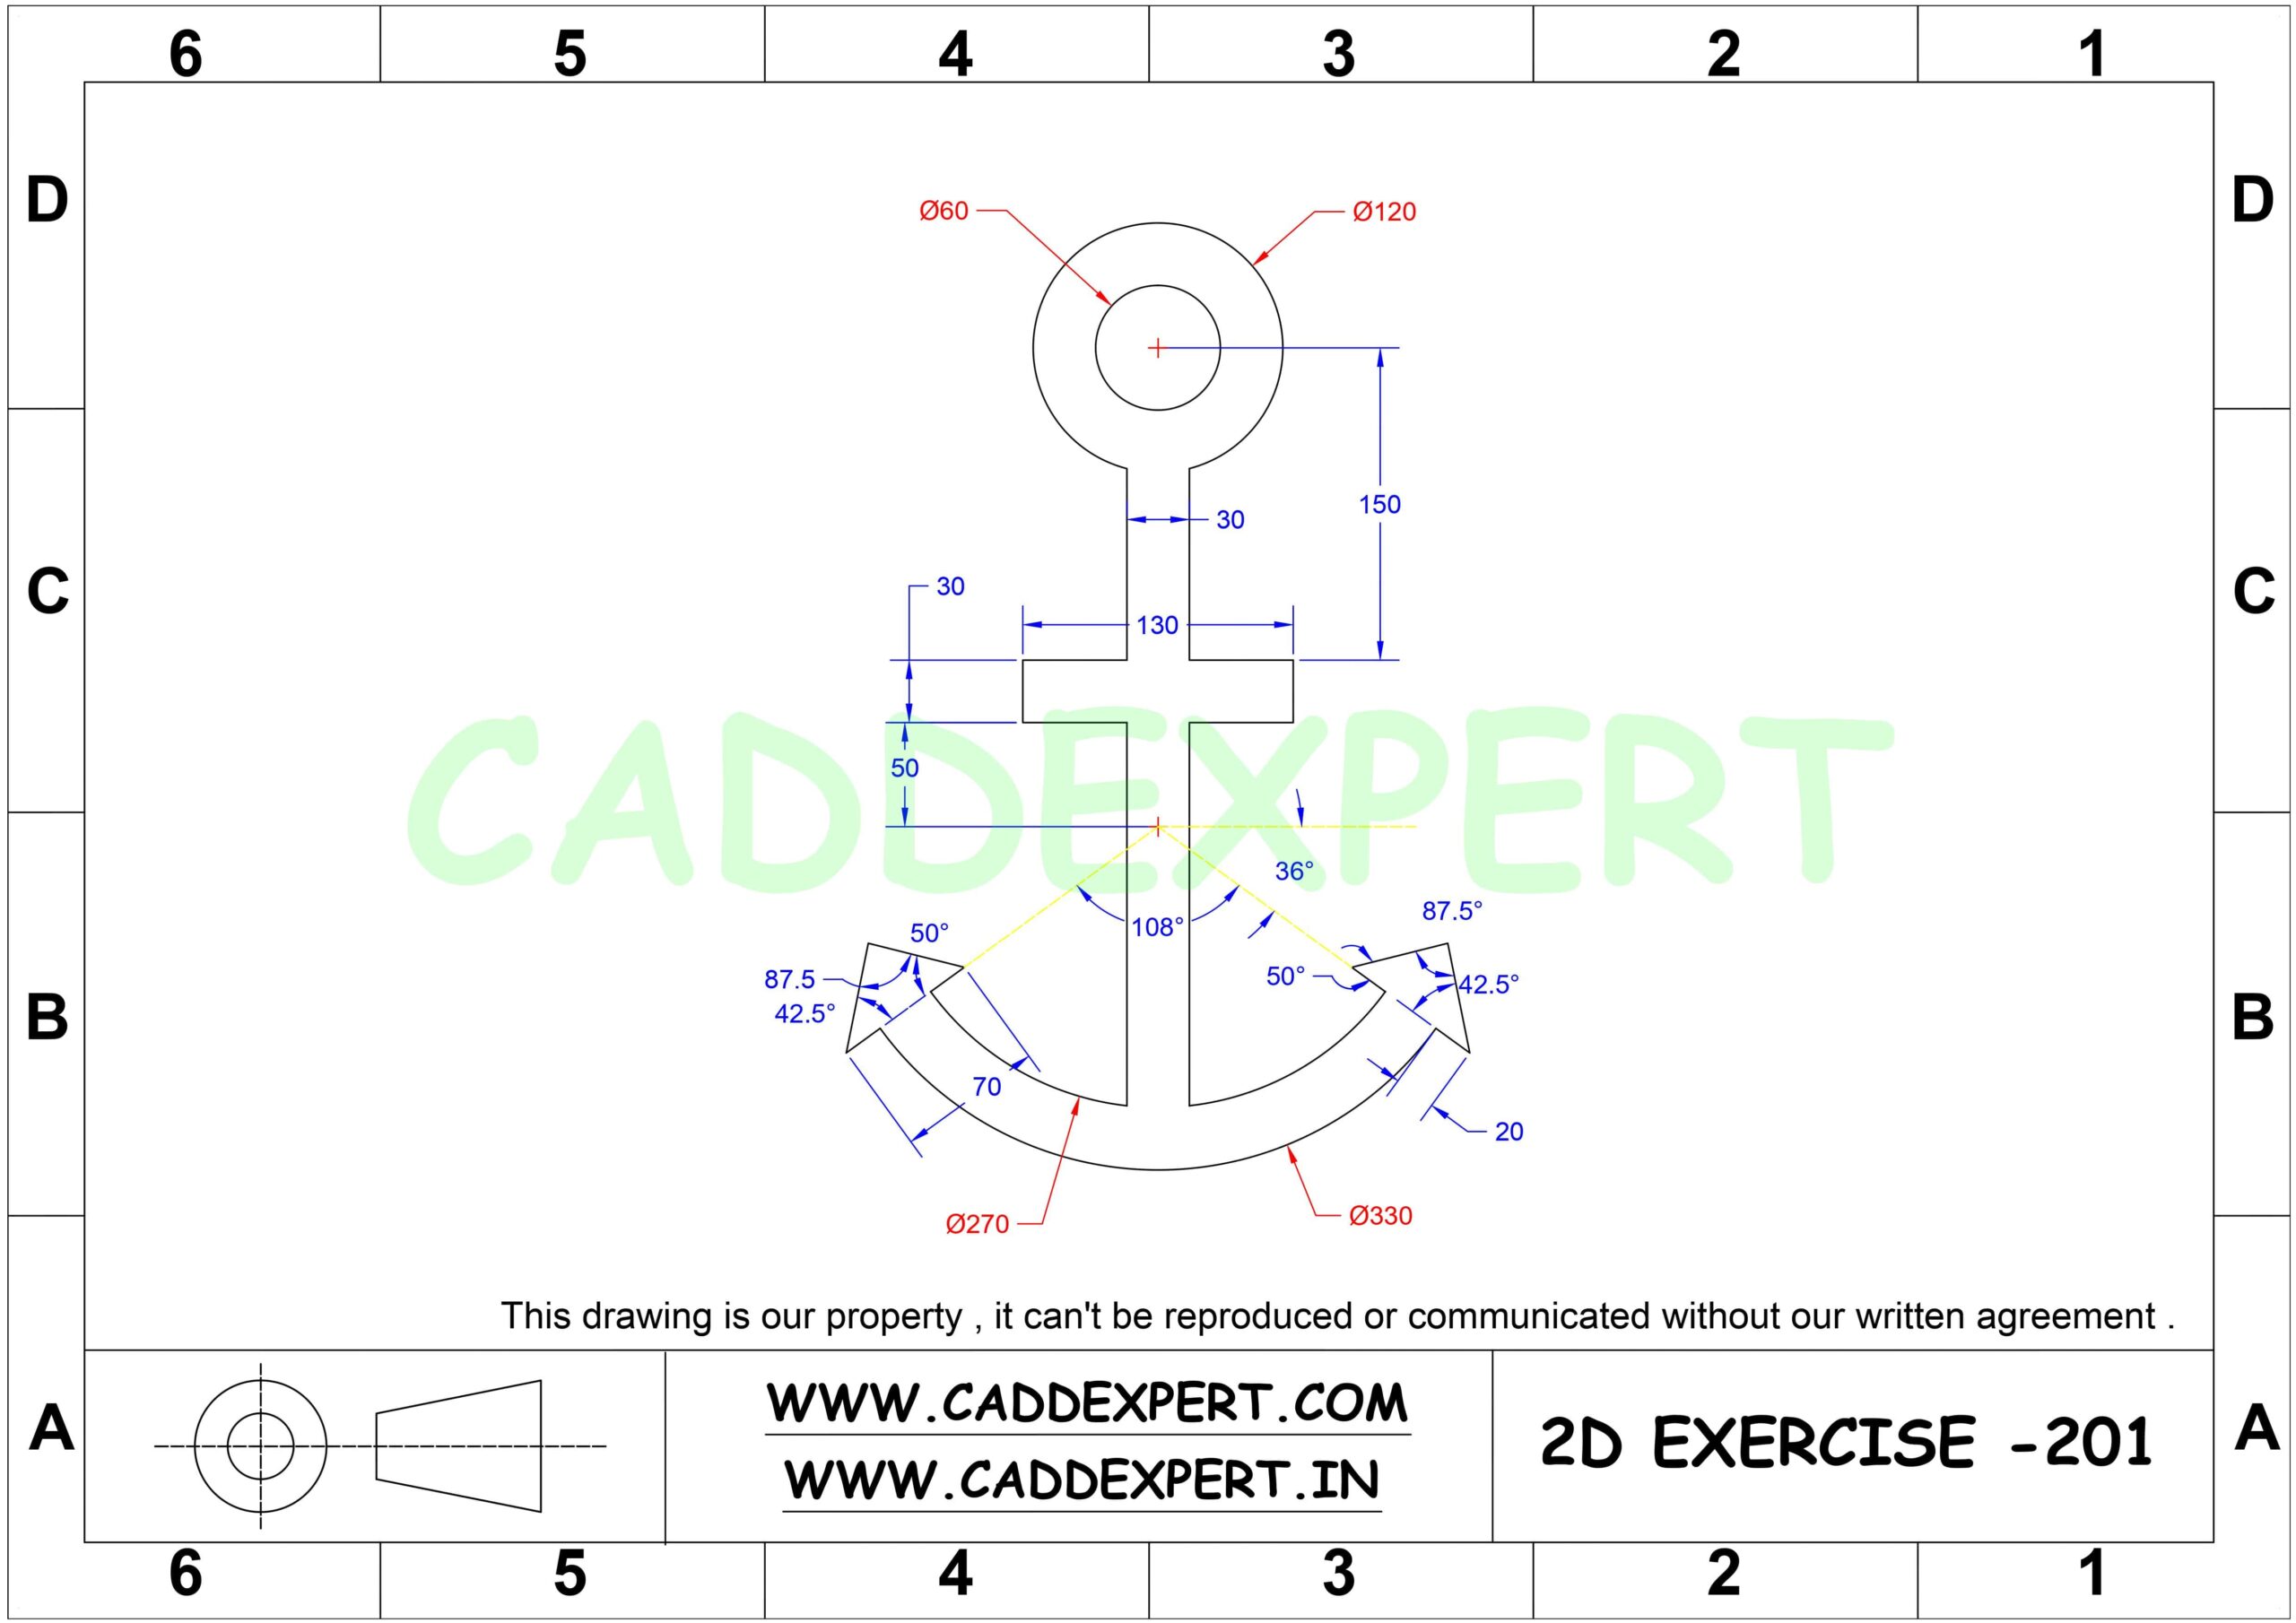 50 AUTOCAD PRACTICE DRAWING - 1